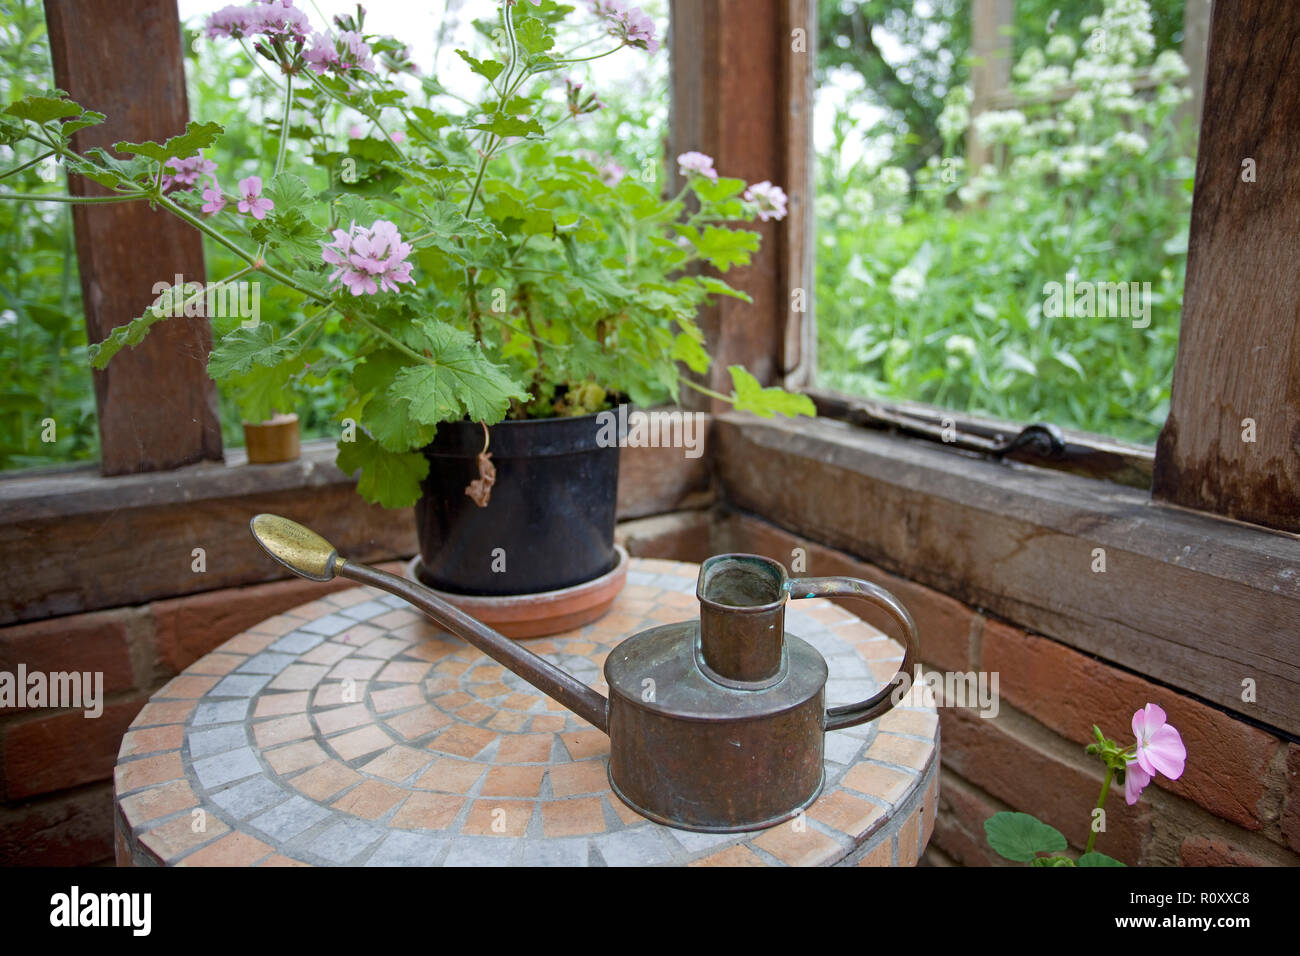 Scented Geranium in pot on table Stock Photo